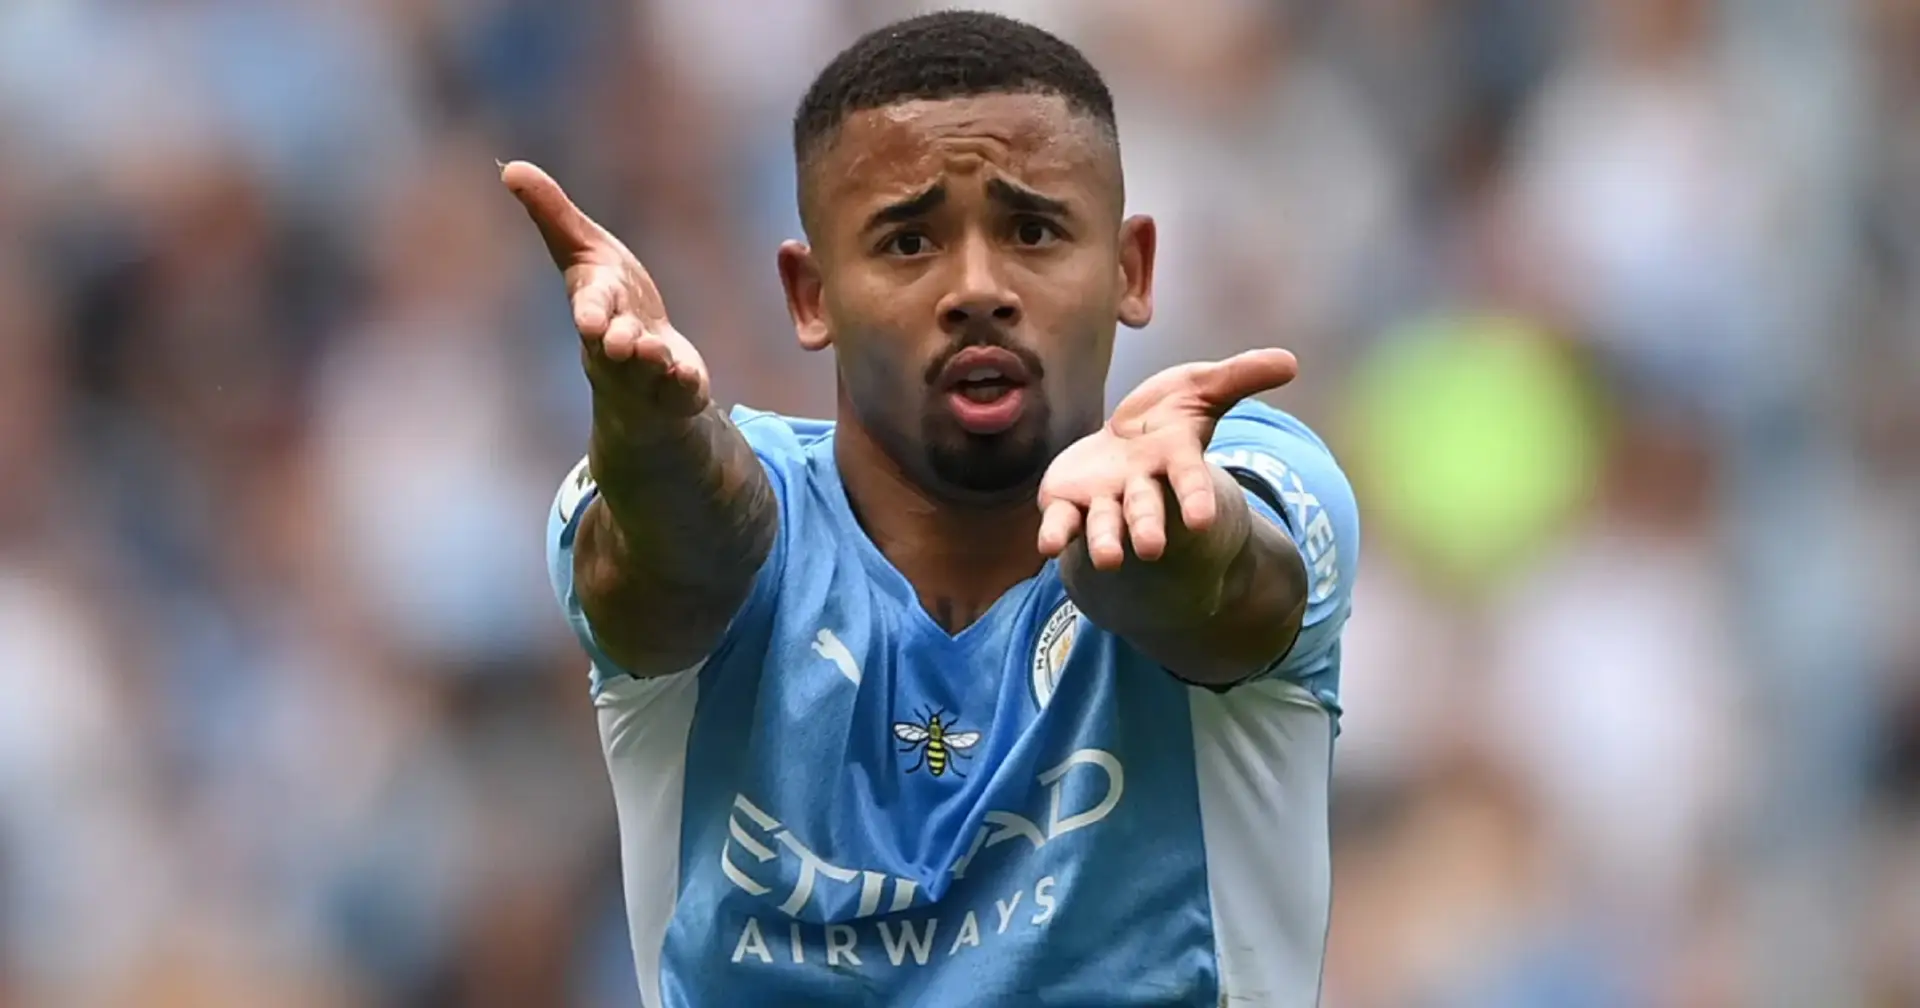 Gabriel Jesus offered to Chelsea & 3 more big stories you might've missed